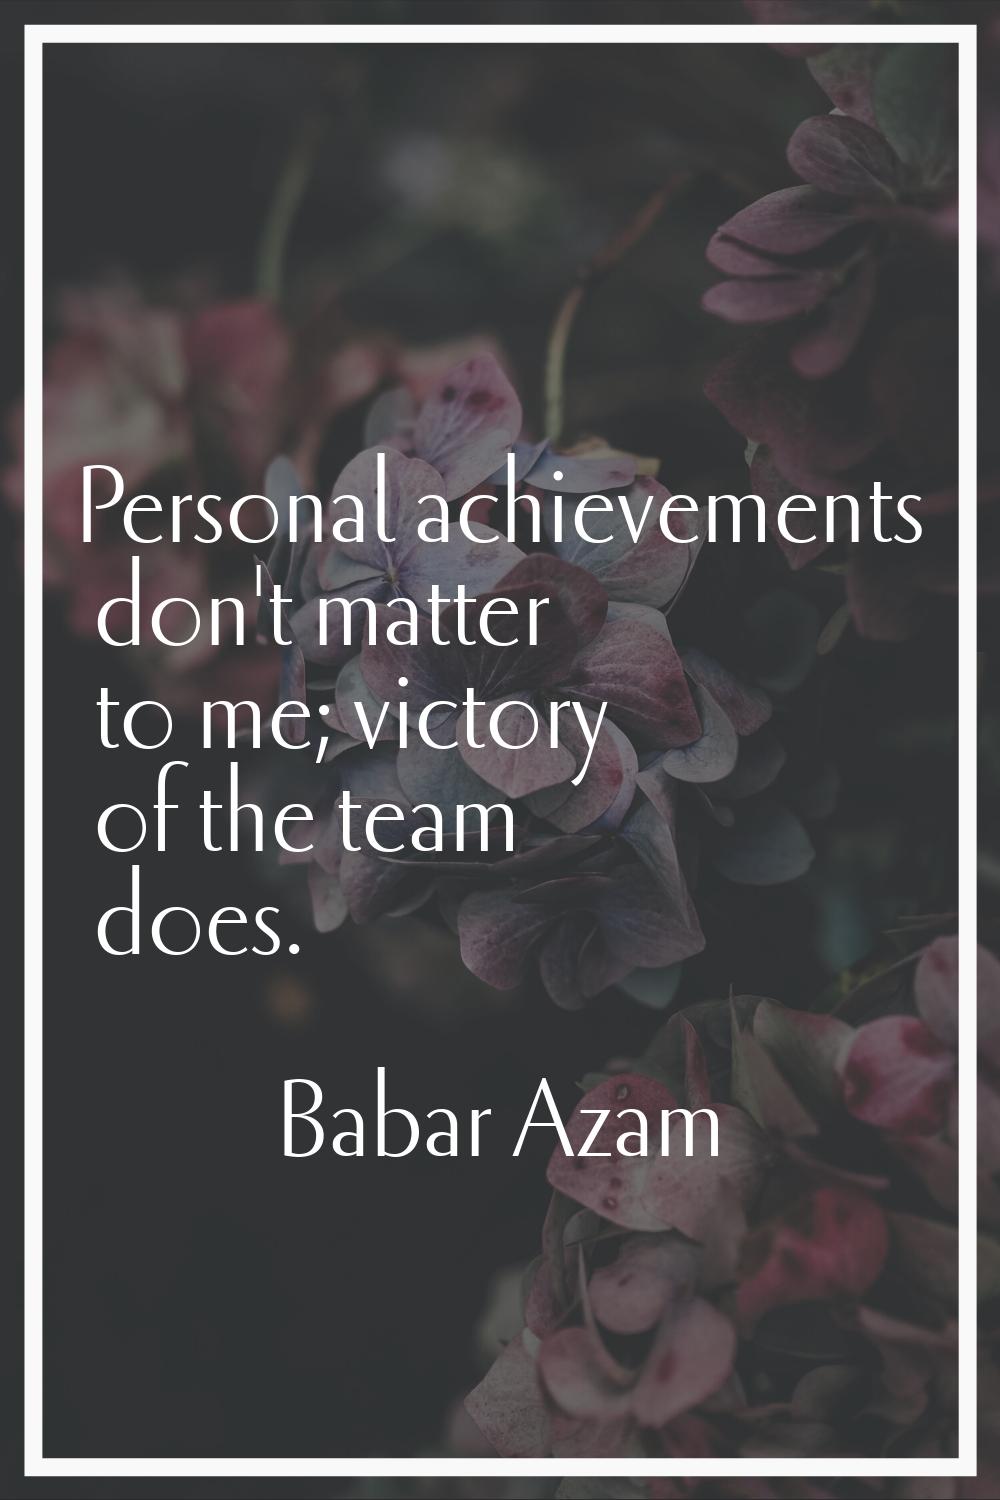 Personal achievements don't matter to me; victory of the team does.